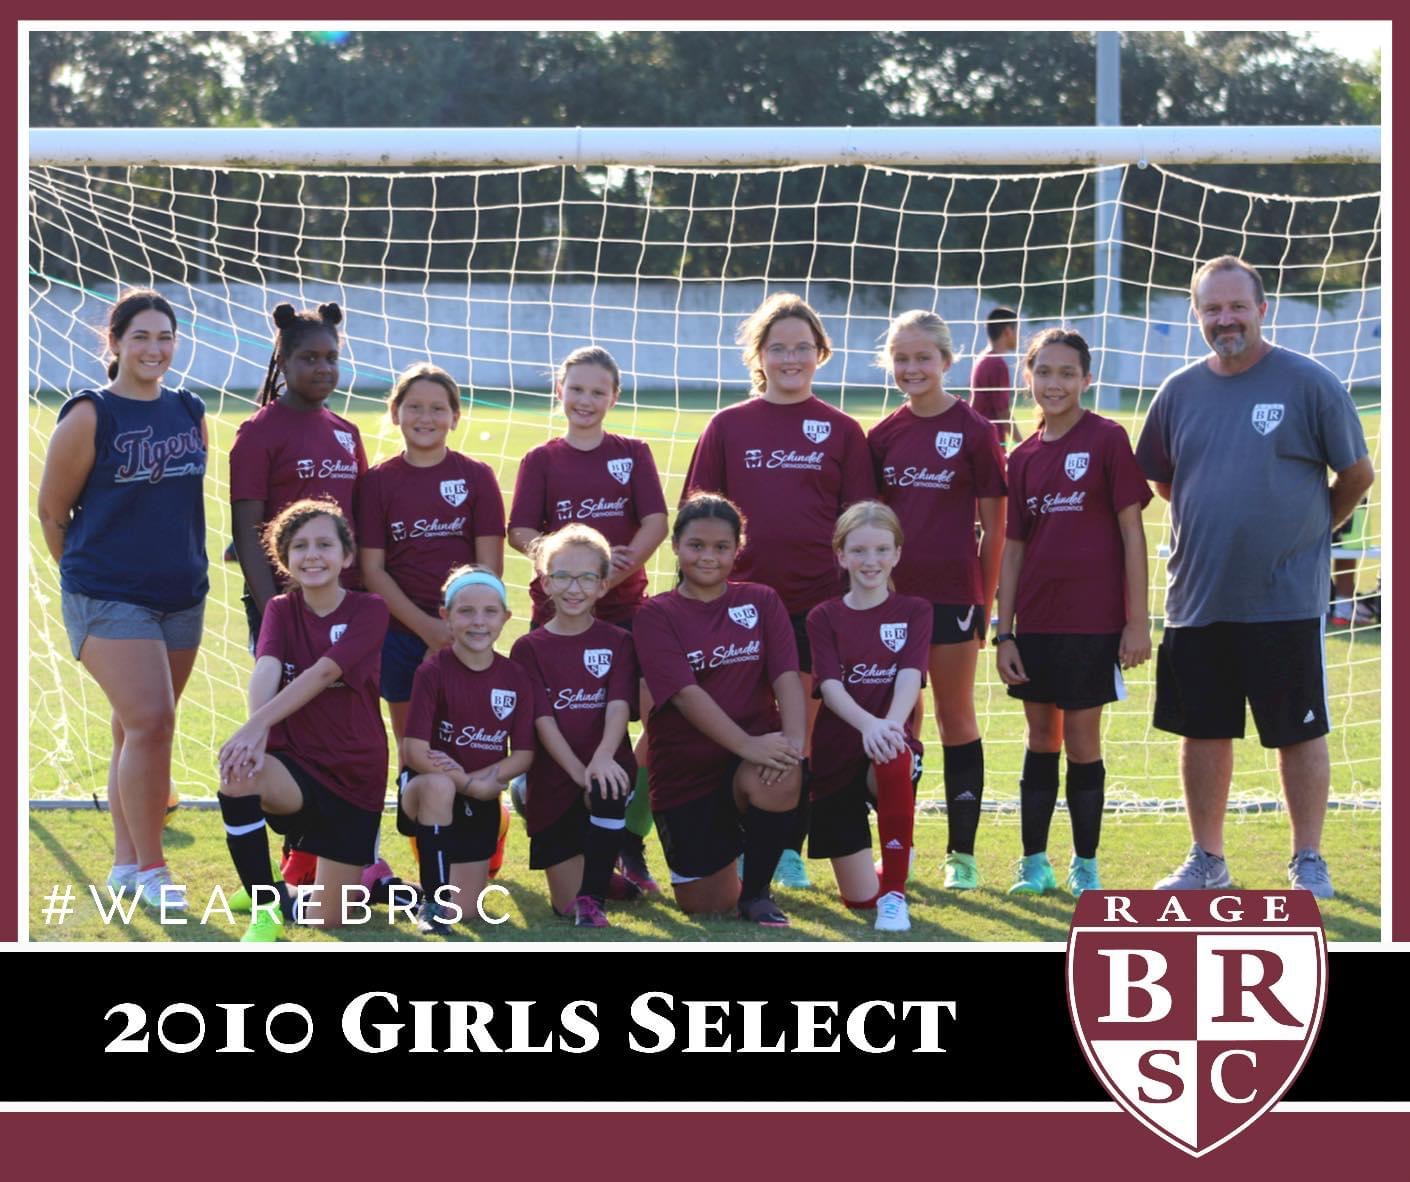 Girls 2010/11 Select Team Cover